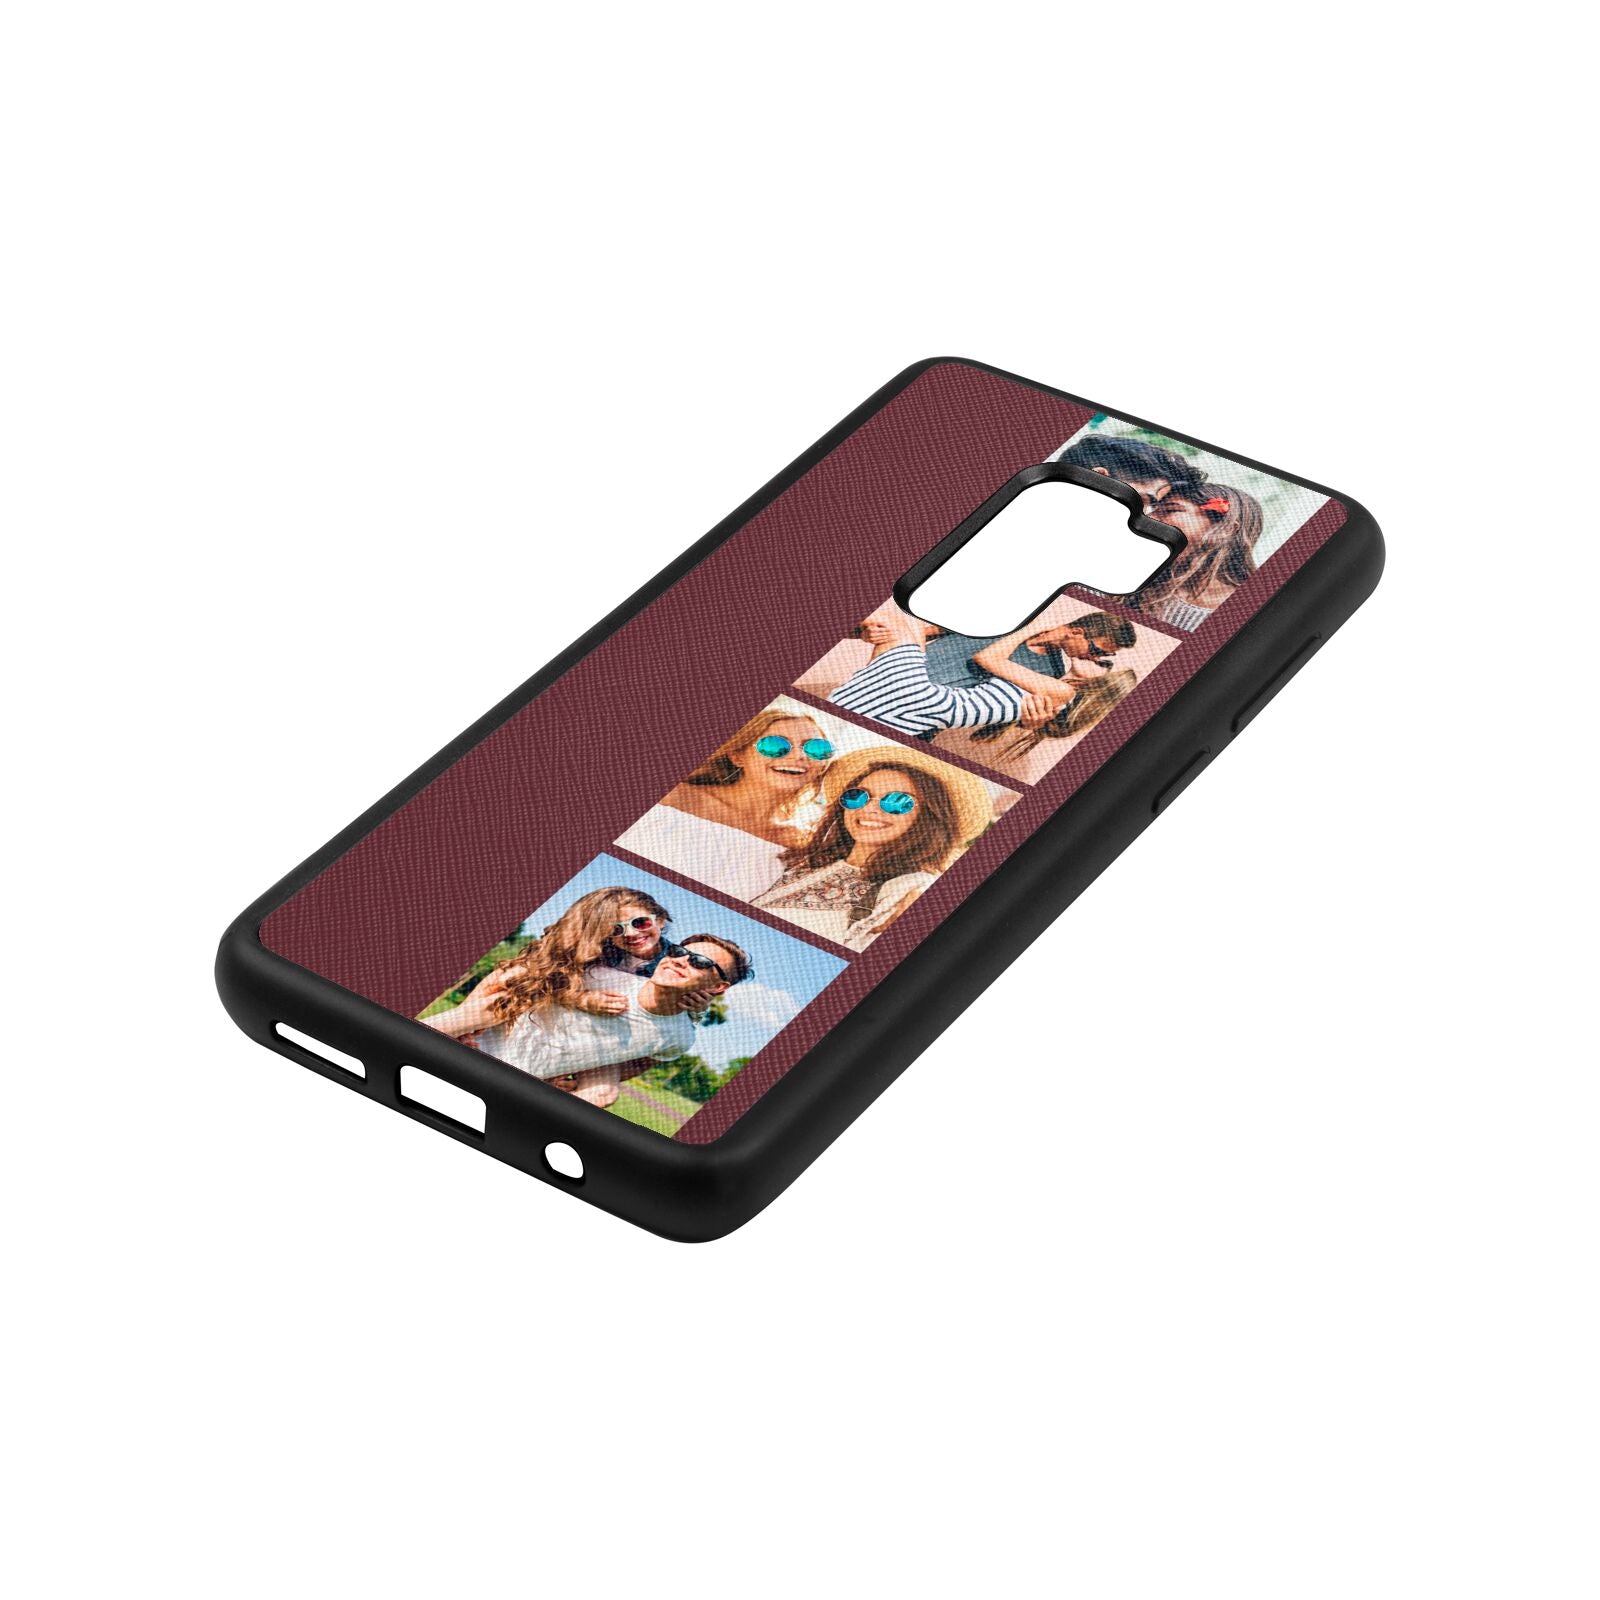 Photo Strip Montage Upload Rose Brown Saffiano Leather Samsung S9 Plus Case Side Angle